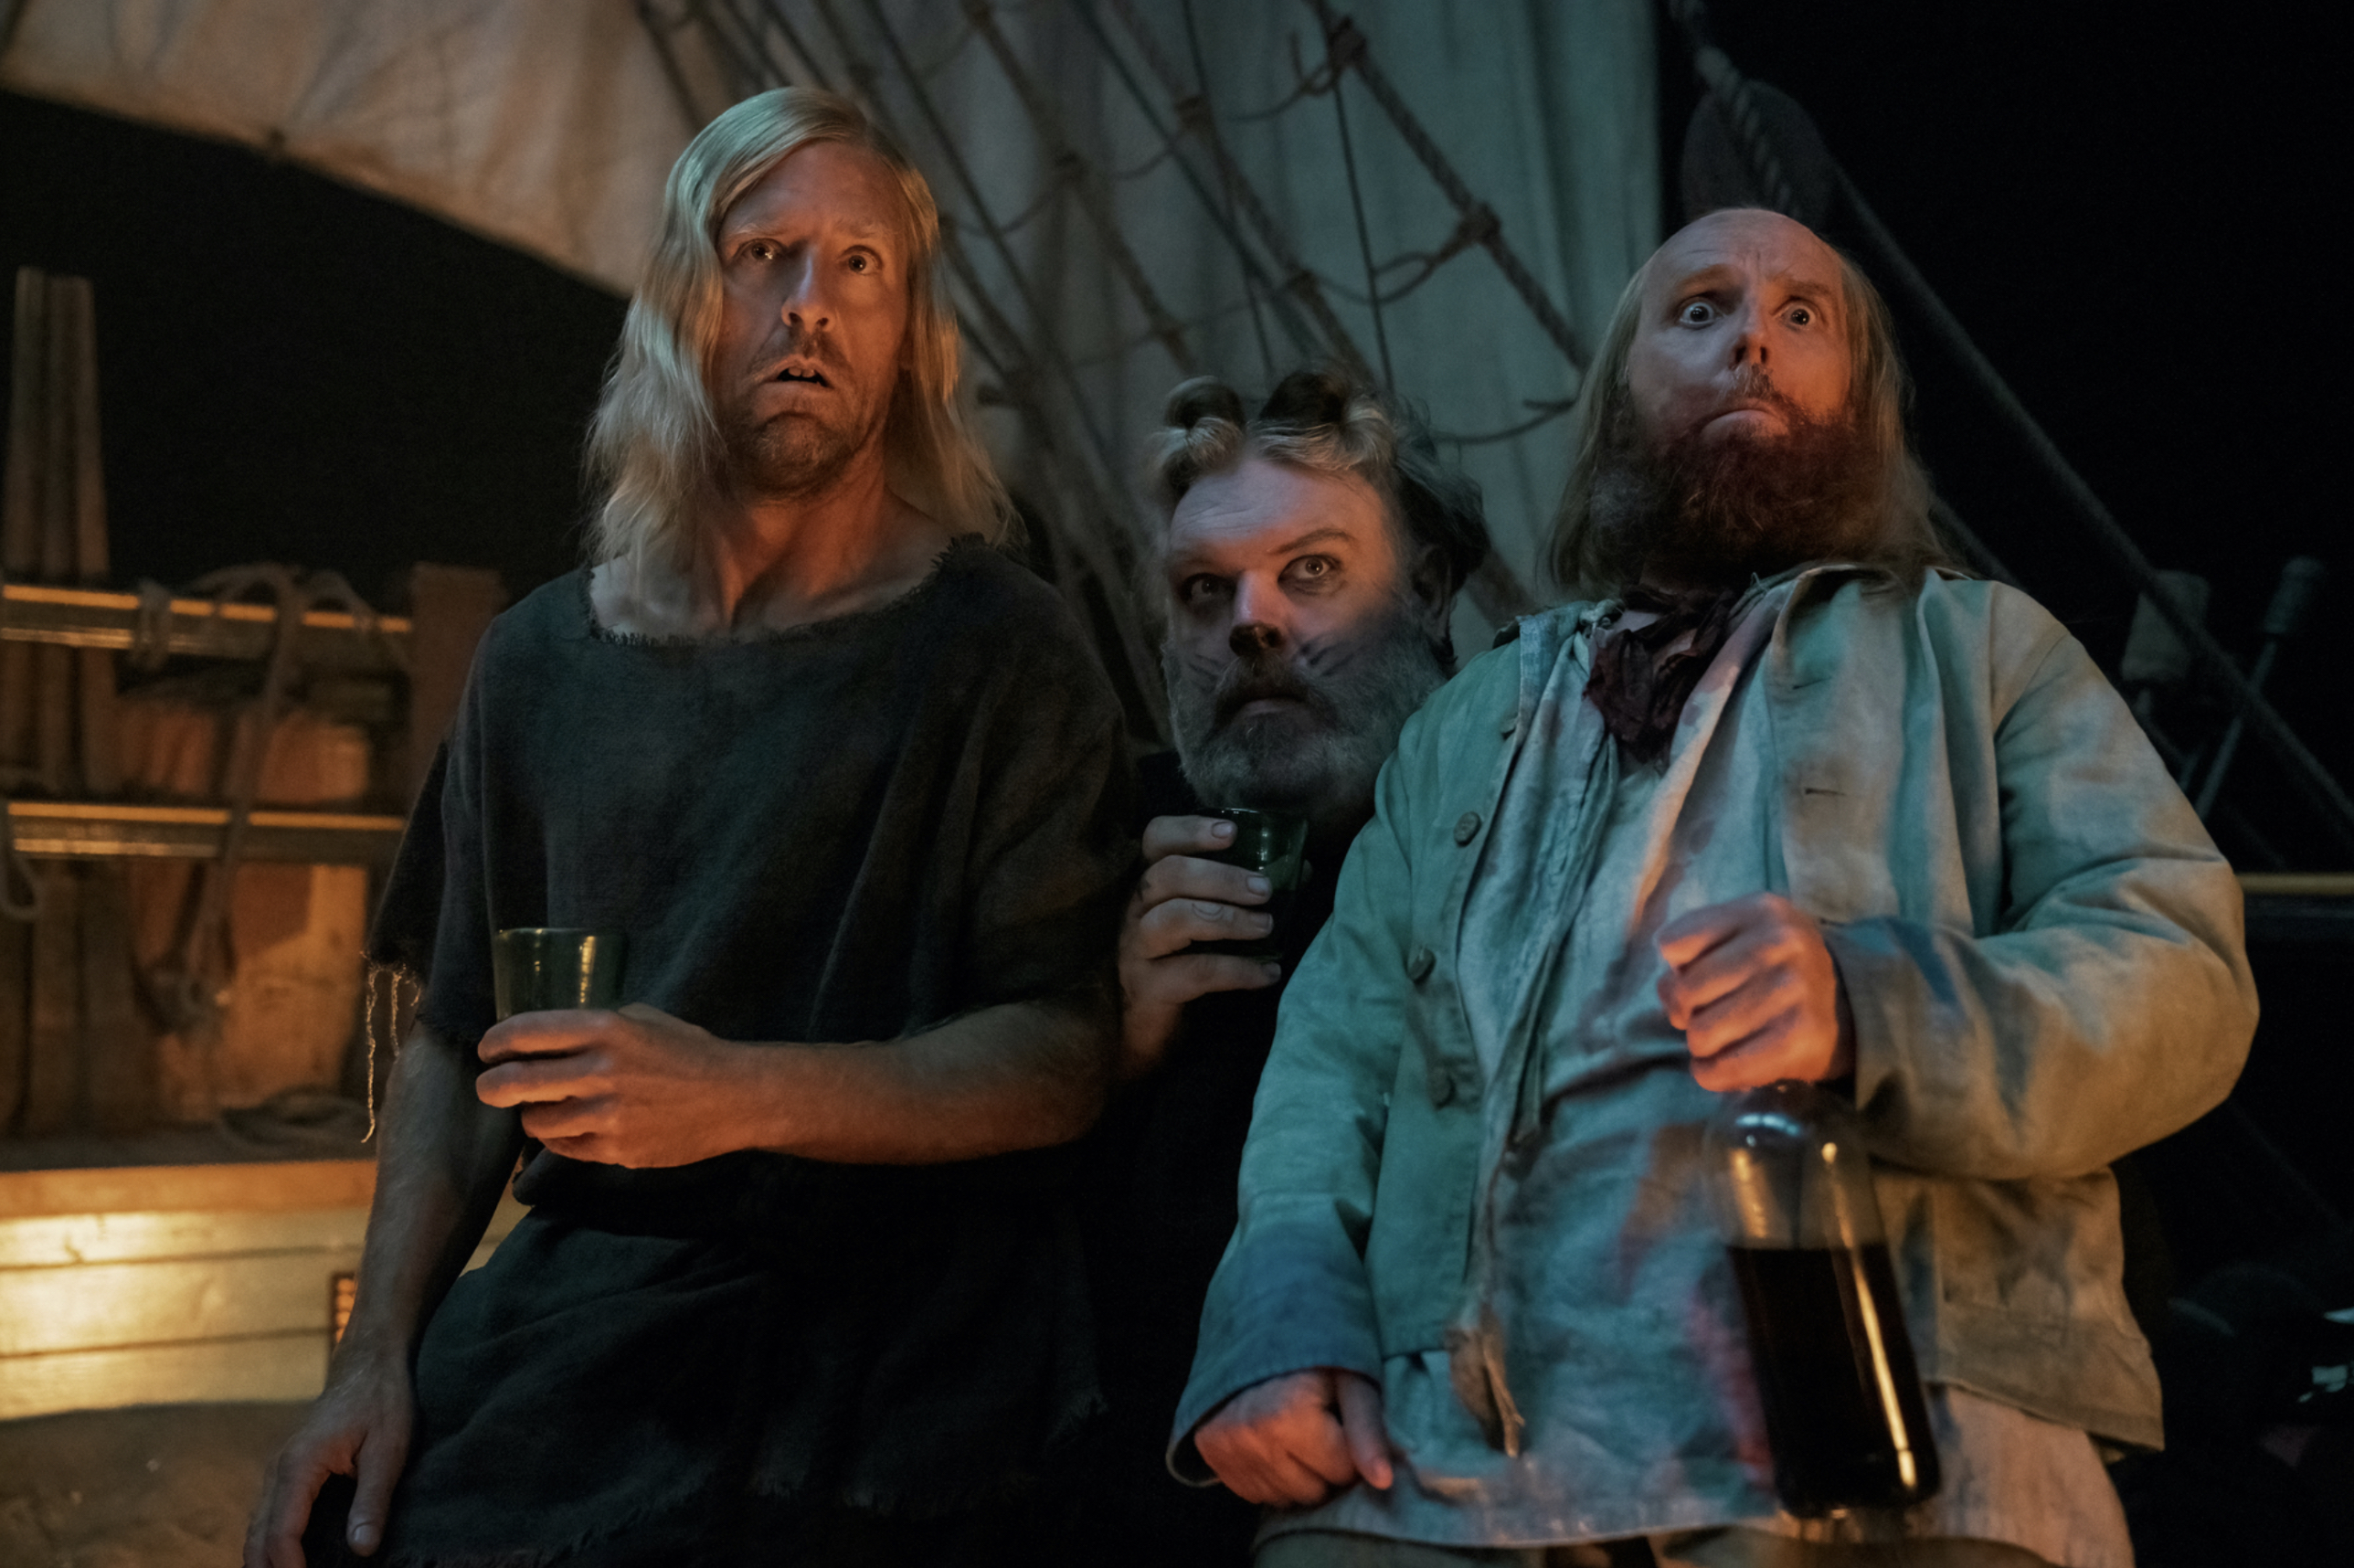 Nat Faxon, Kristian Nairn, and Ewen Bremner in David Jenkins's HBO Max period comedy adventure swashbuckler series, Our Flag Means Death, Season 1 Episode 6